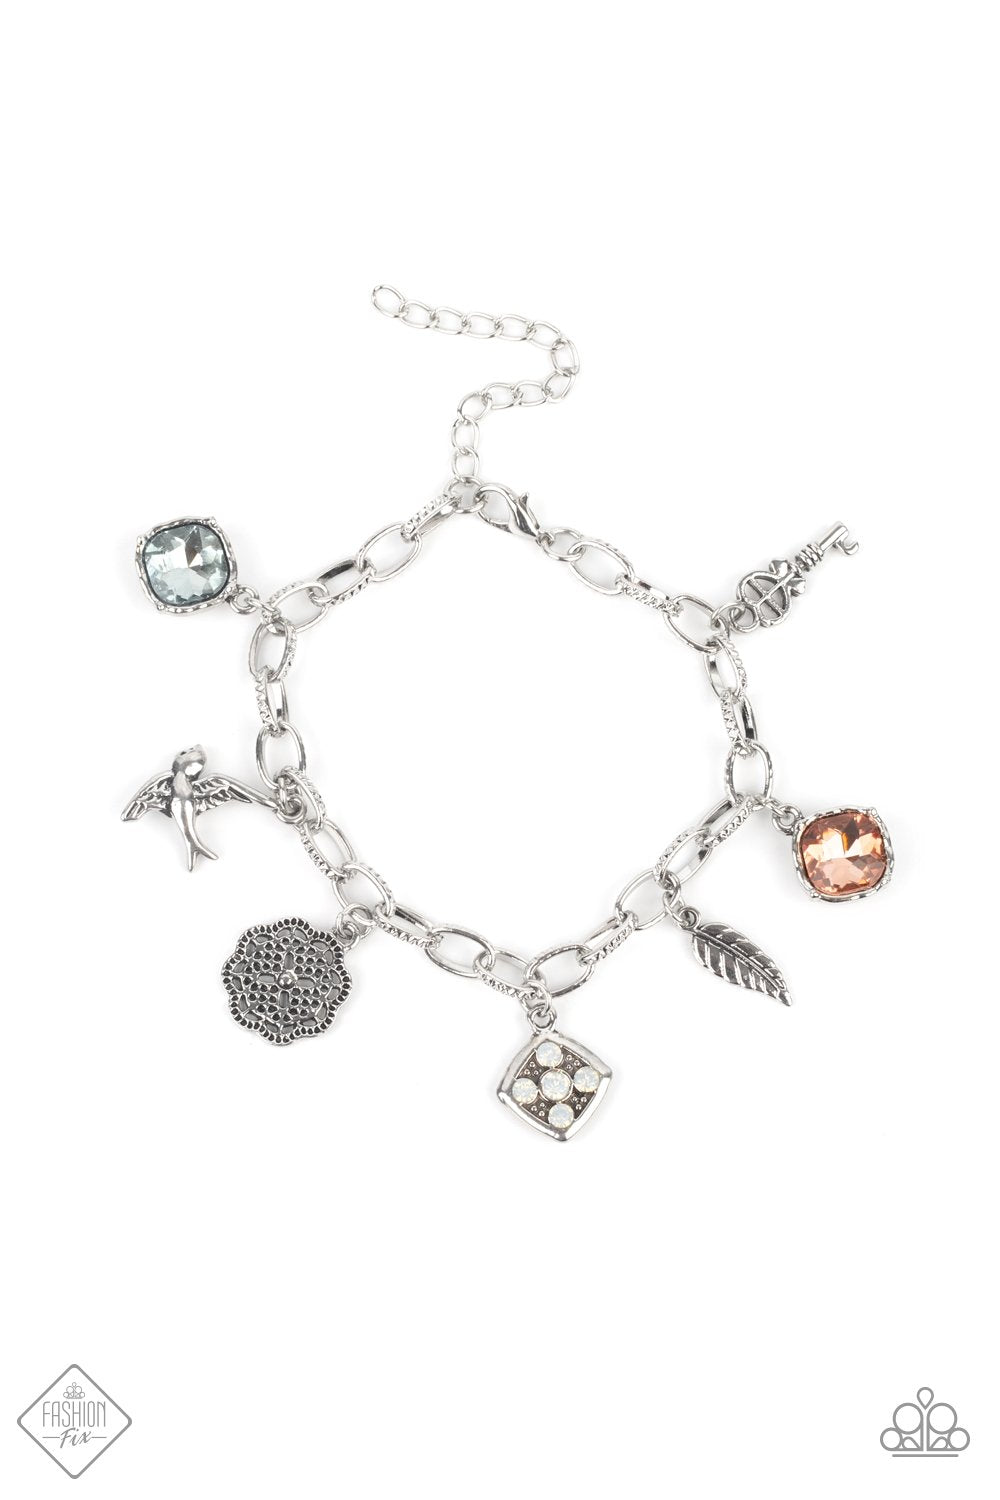 Fancifully Flighty Multi Gem and Silver Charm Bracelet - Paparazzi Accessories- lightbox - CarasShop.com - $5 Jewelry by Cara Jewels